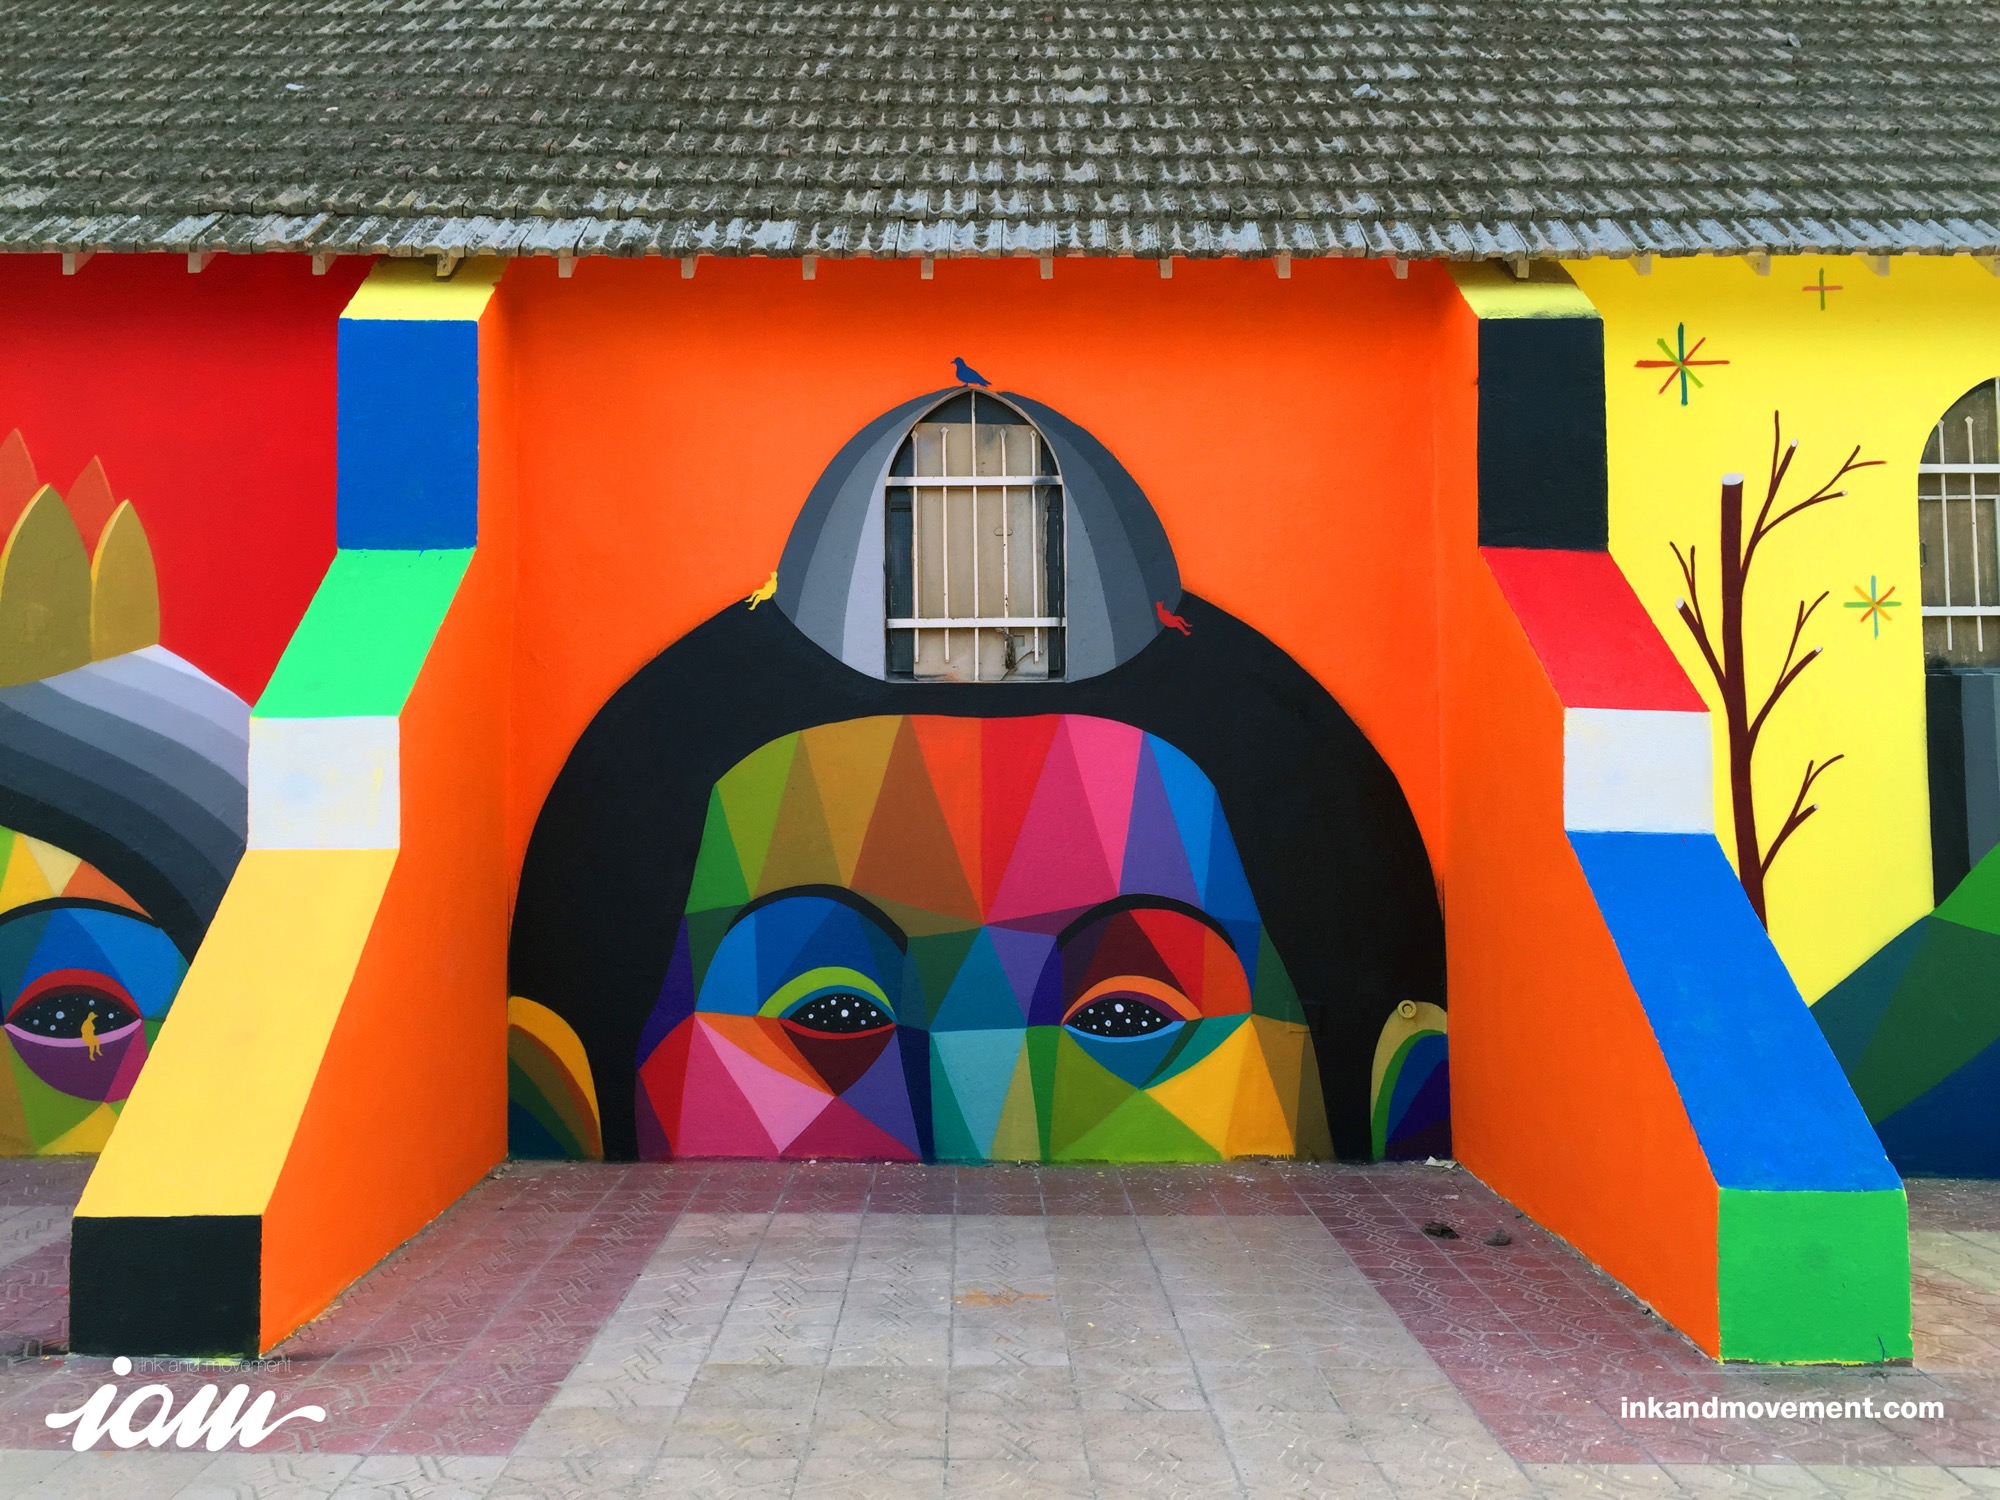 “11 Mirages to the Freedom” by Okuda in Youssoufia, Morocco - the vandallist (8)